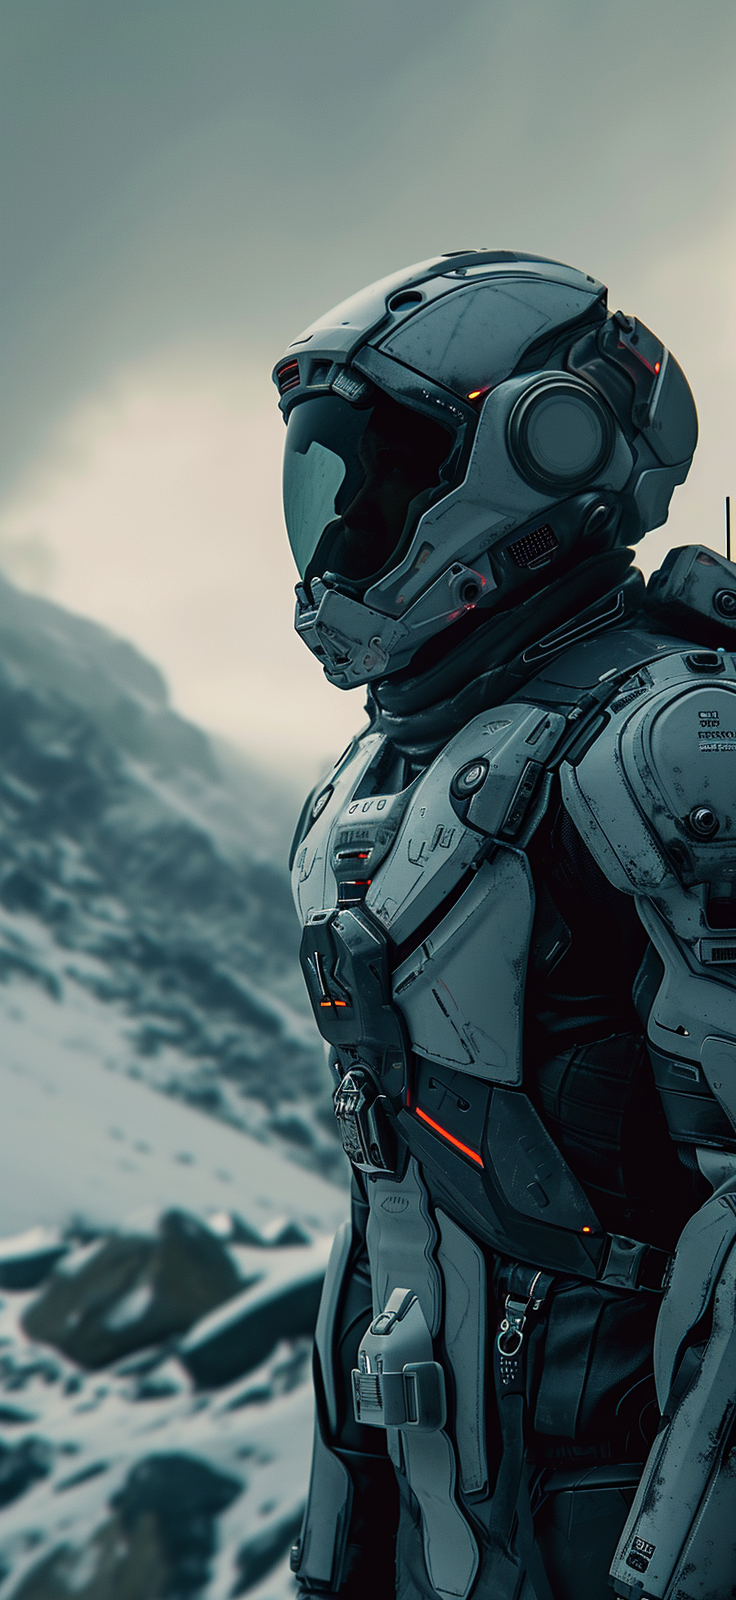 Dive into a world of advanced technology with our HD Futuristic Warrior wallpaper.